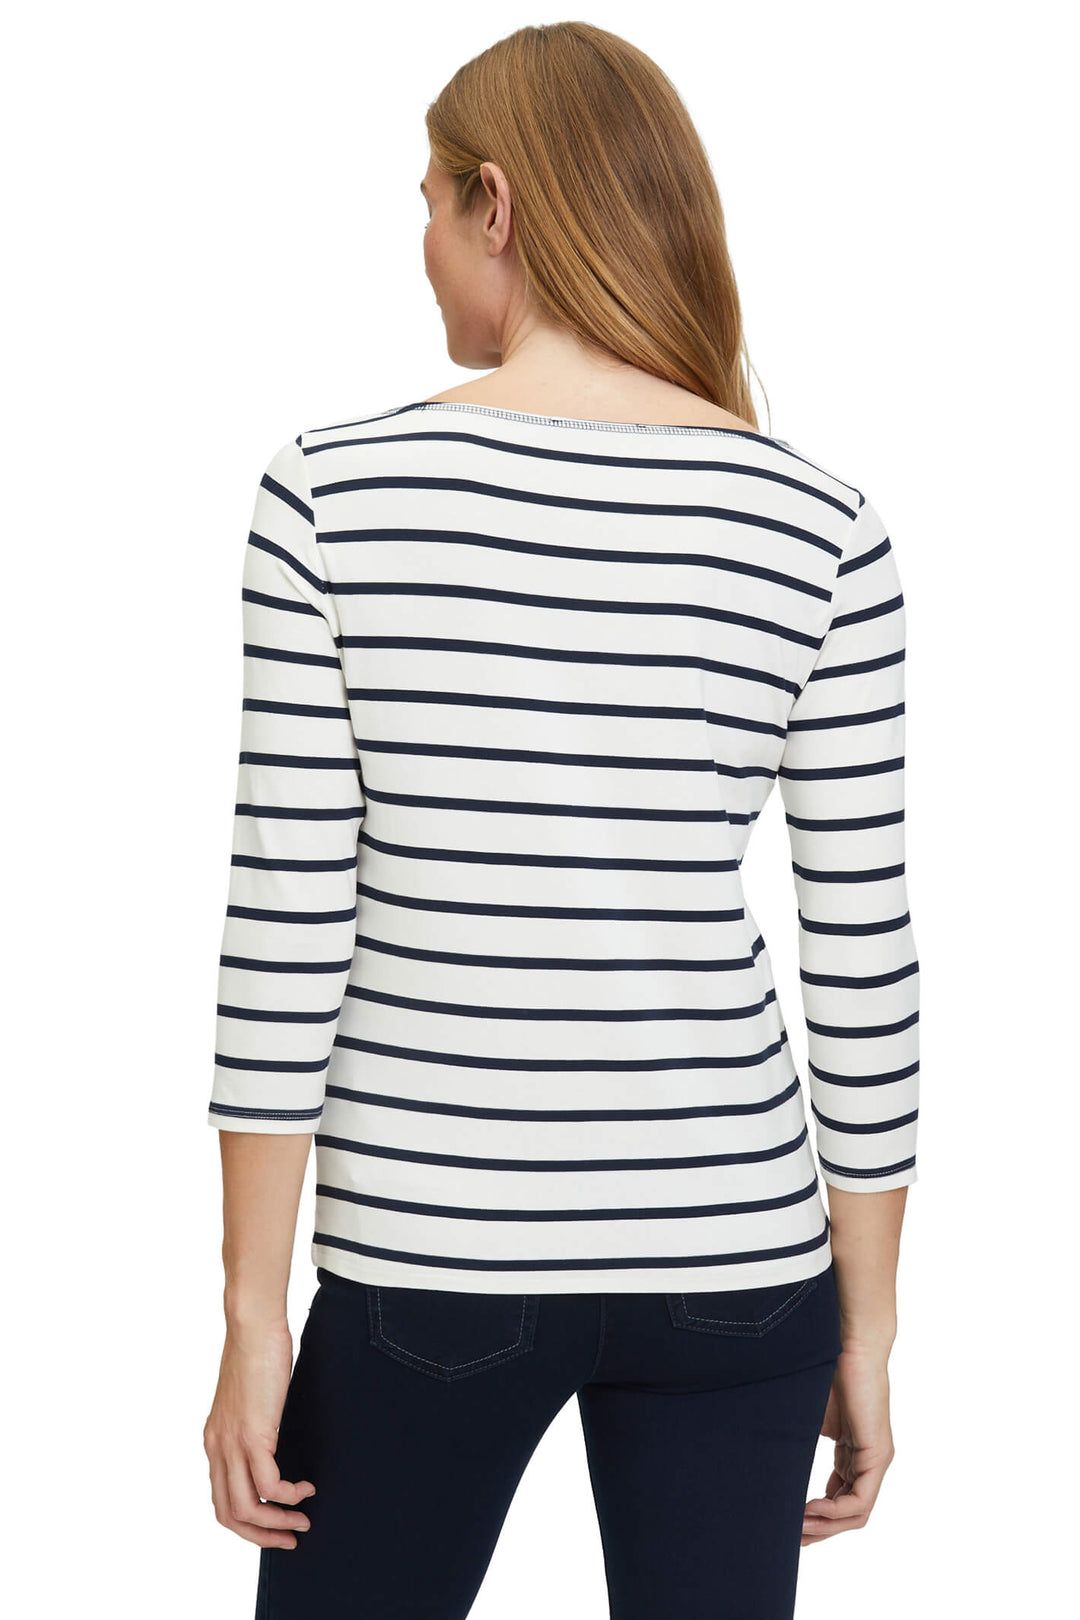 Betty Barclay 2848 2112 1883 Cream Navy Striped Breton Style Top - Dotique Chesterfield